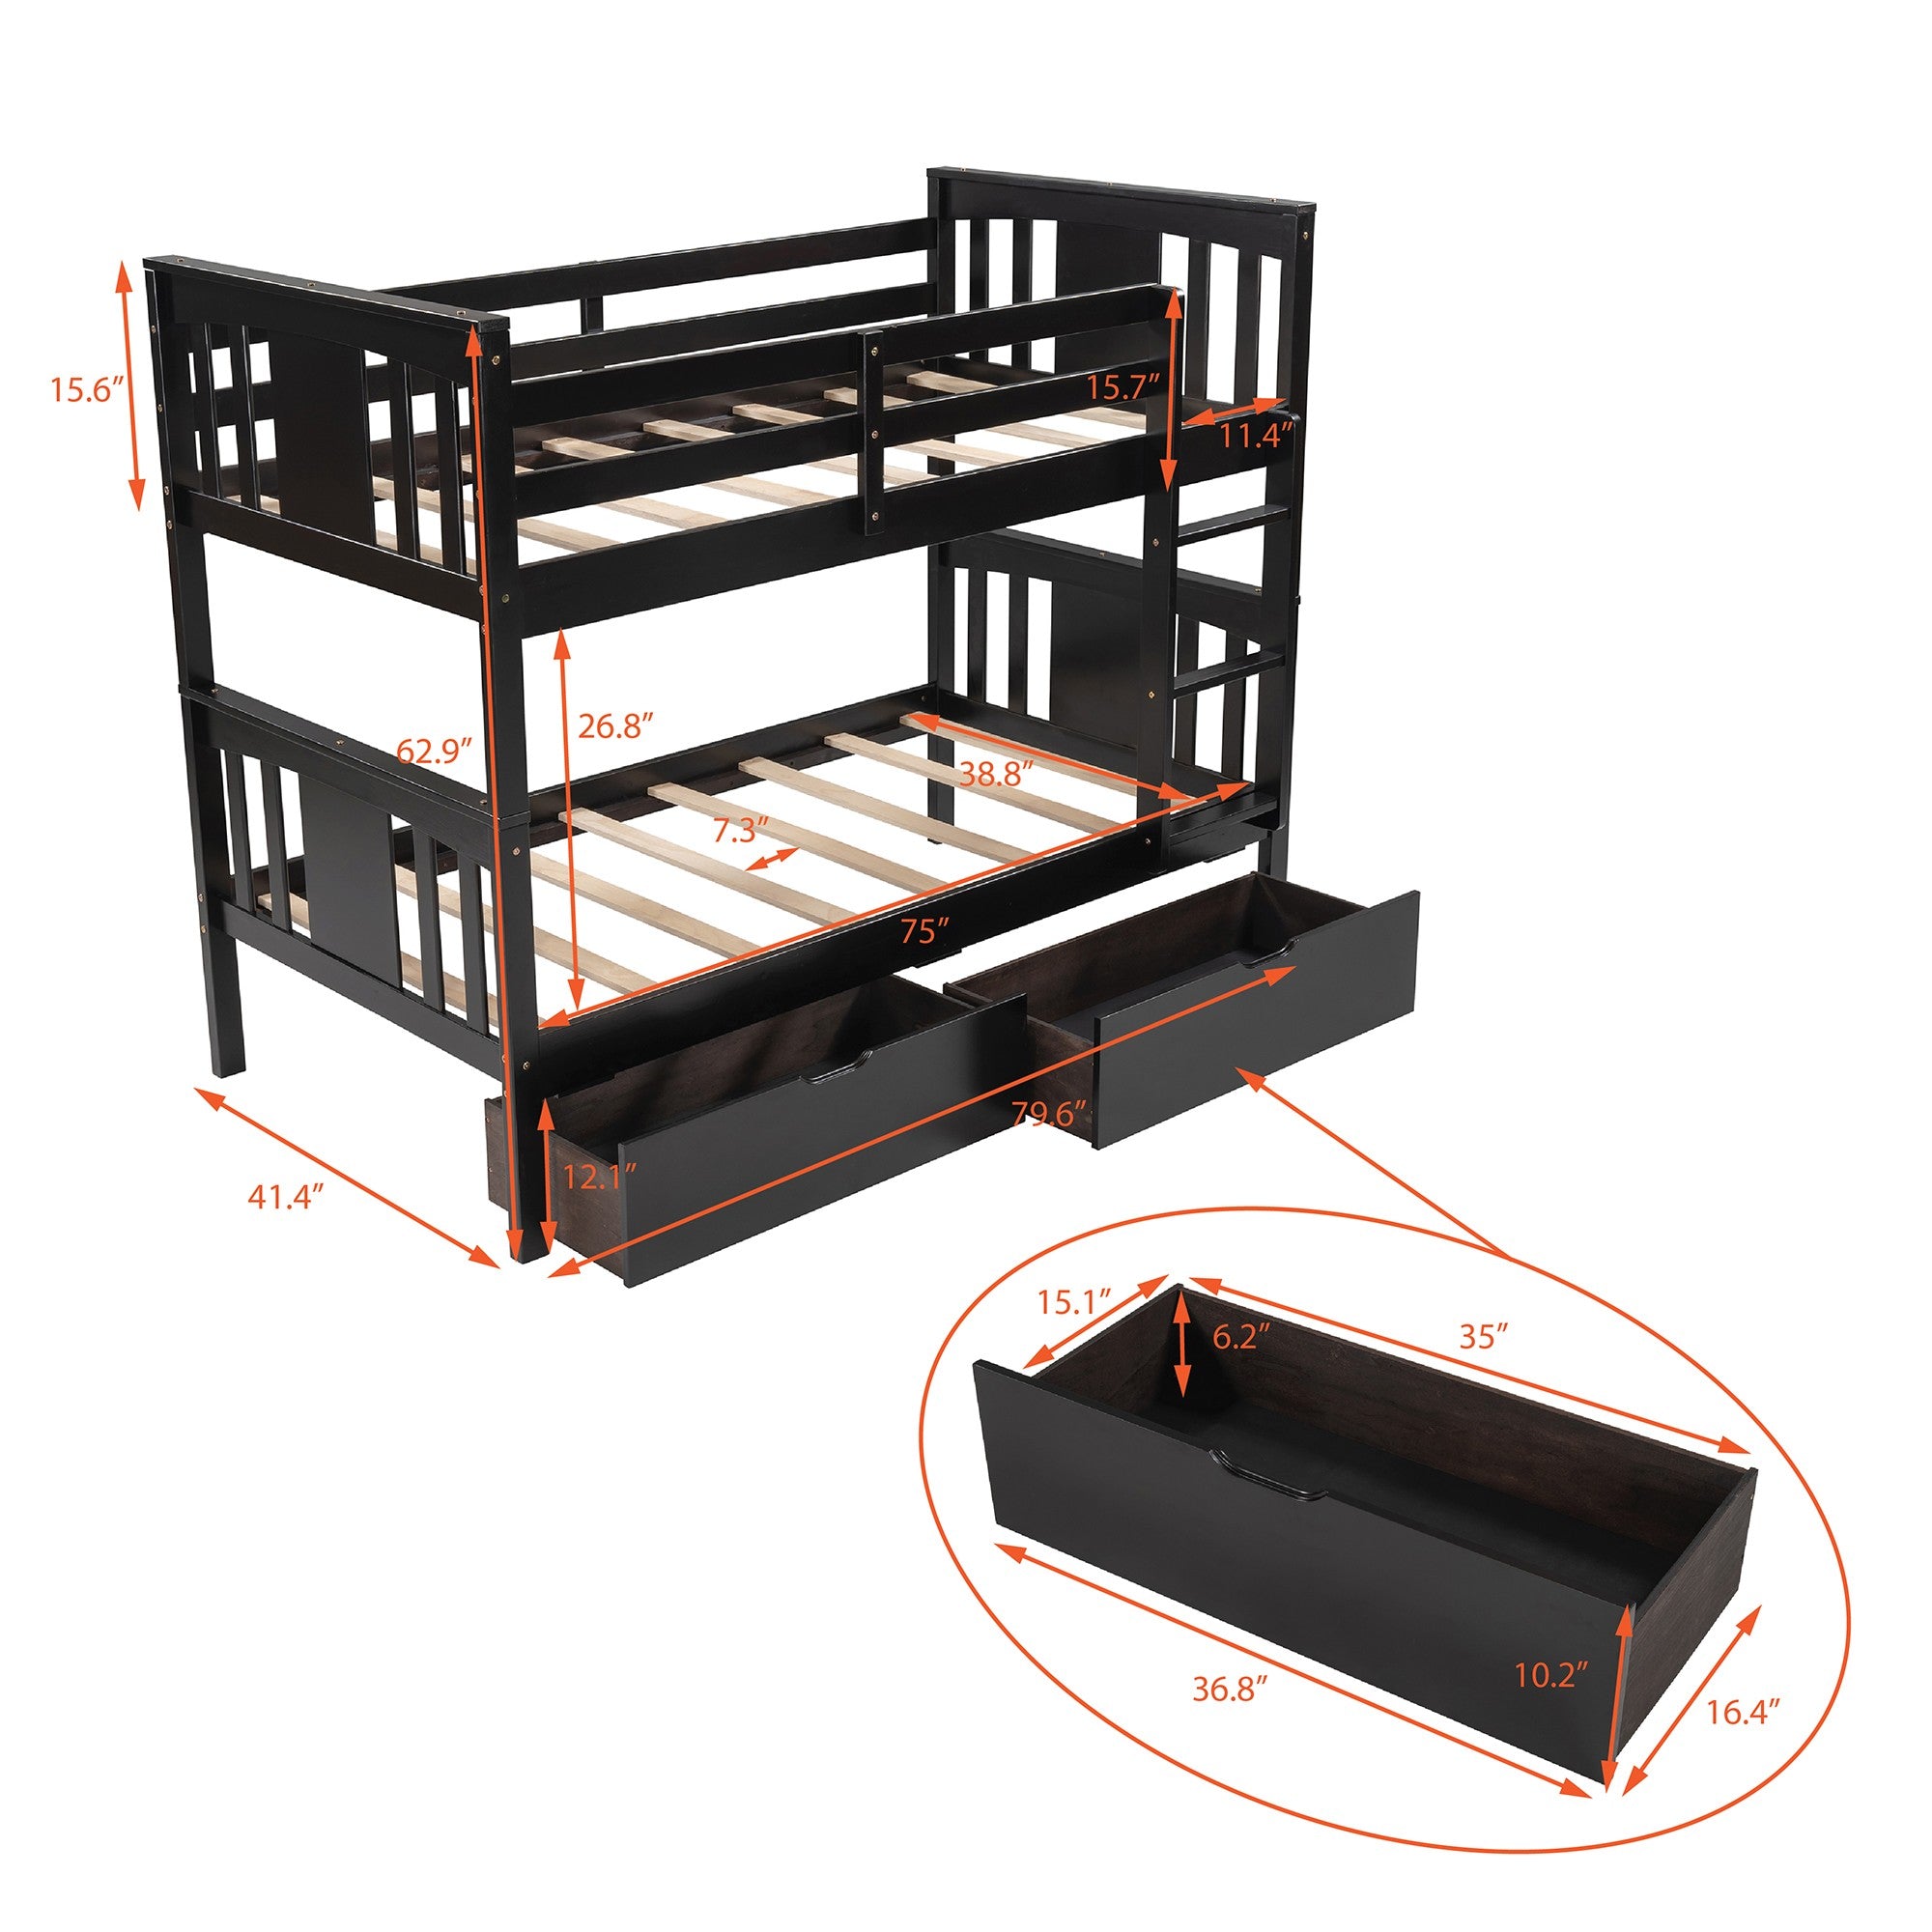 Brown Double Twin Size Ladder Bunk Bed With Drawers Default Title